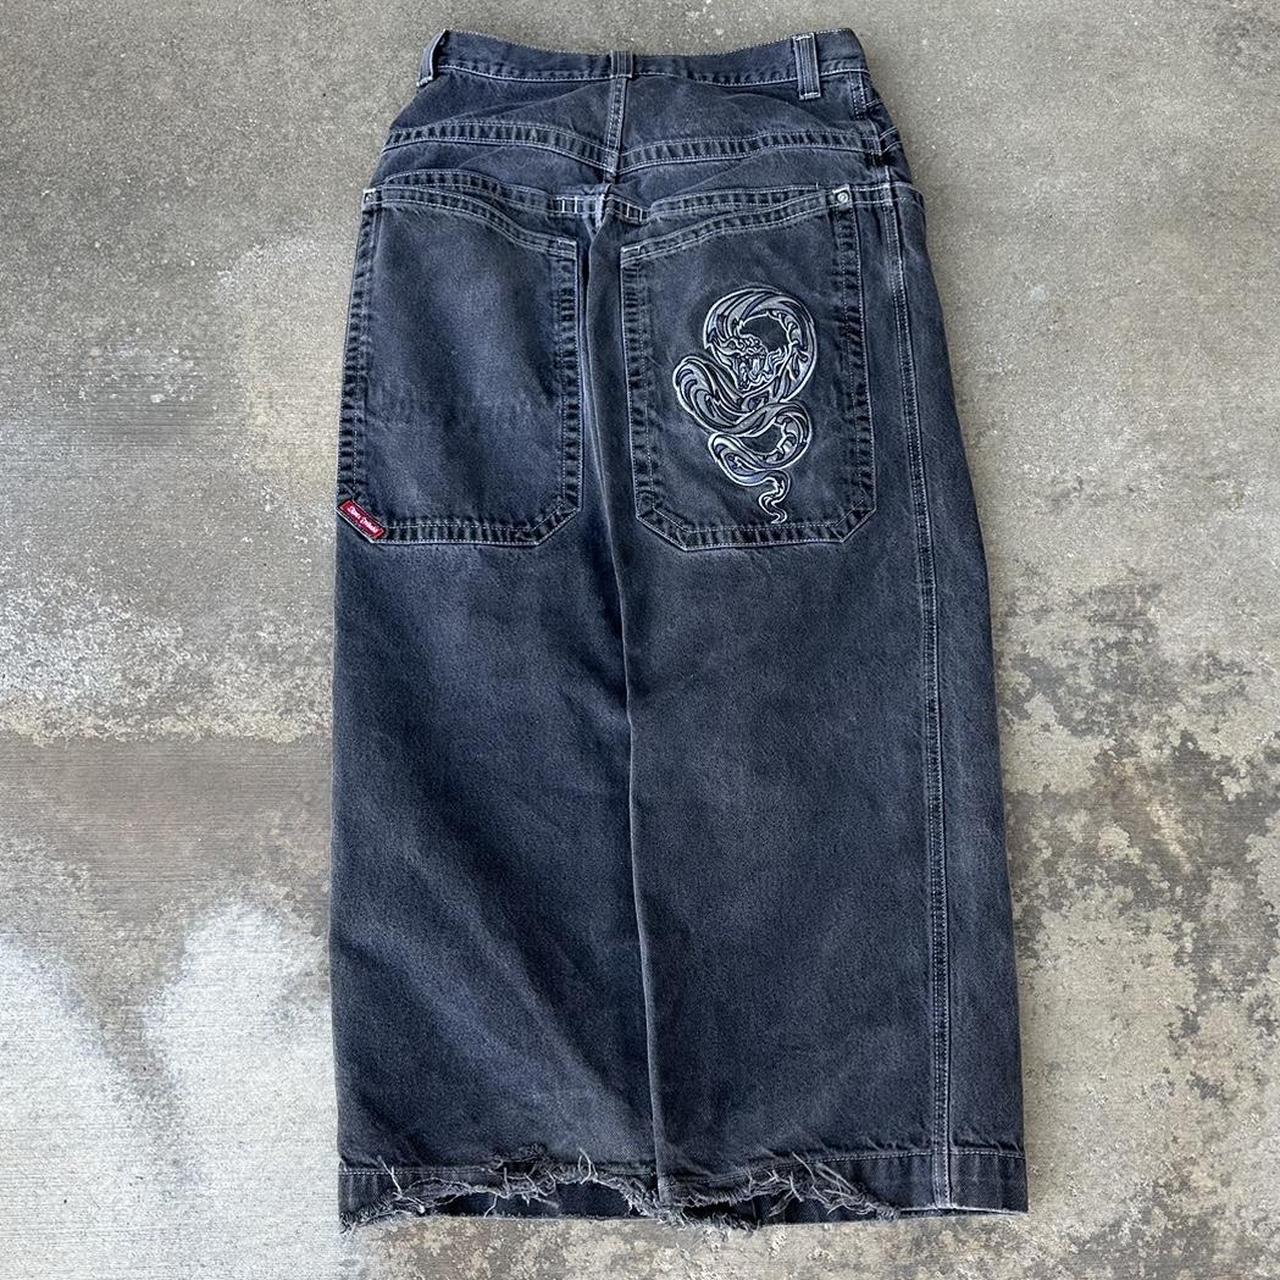 [SOLD] JNCO HISSING SNAKES 90s Jeans THIS ITEM HAS... - Depop